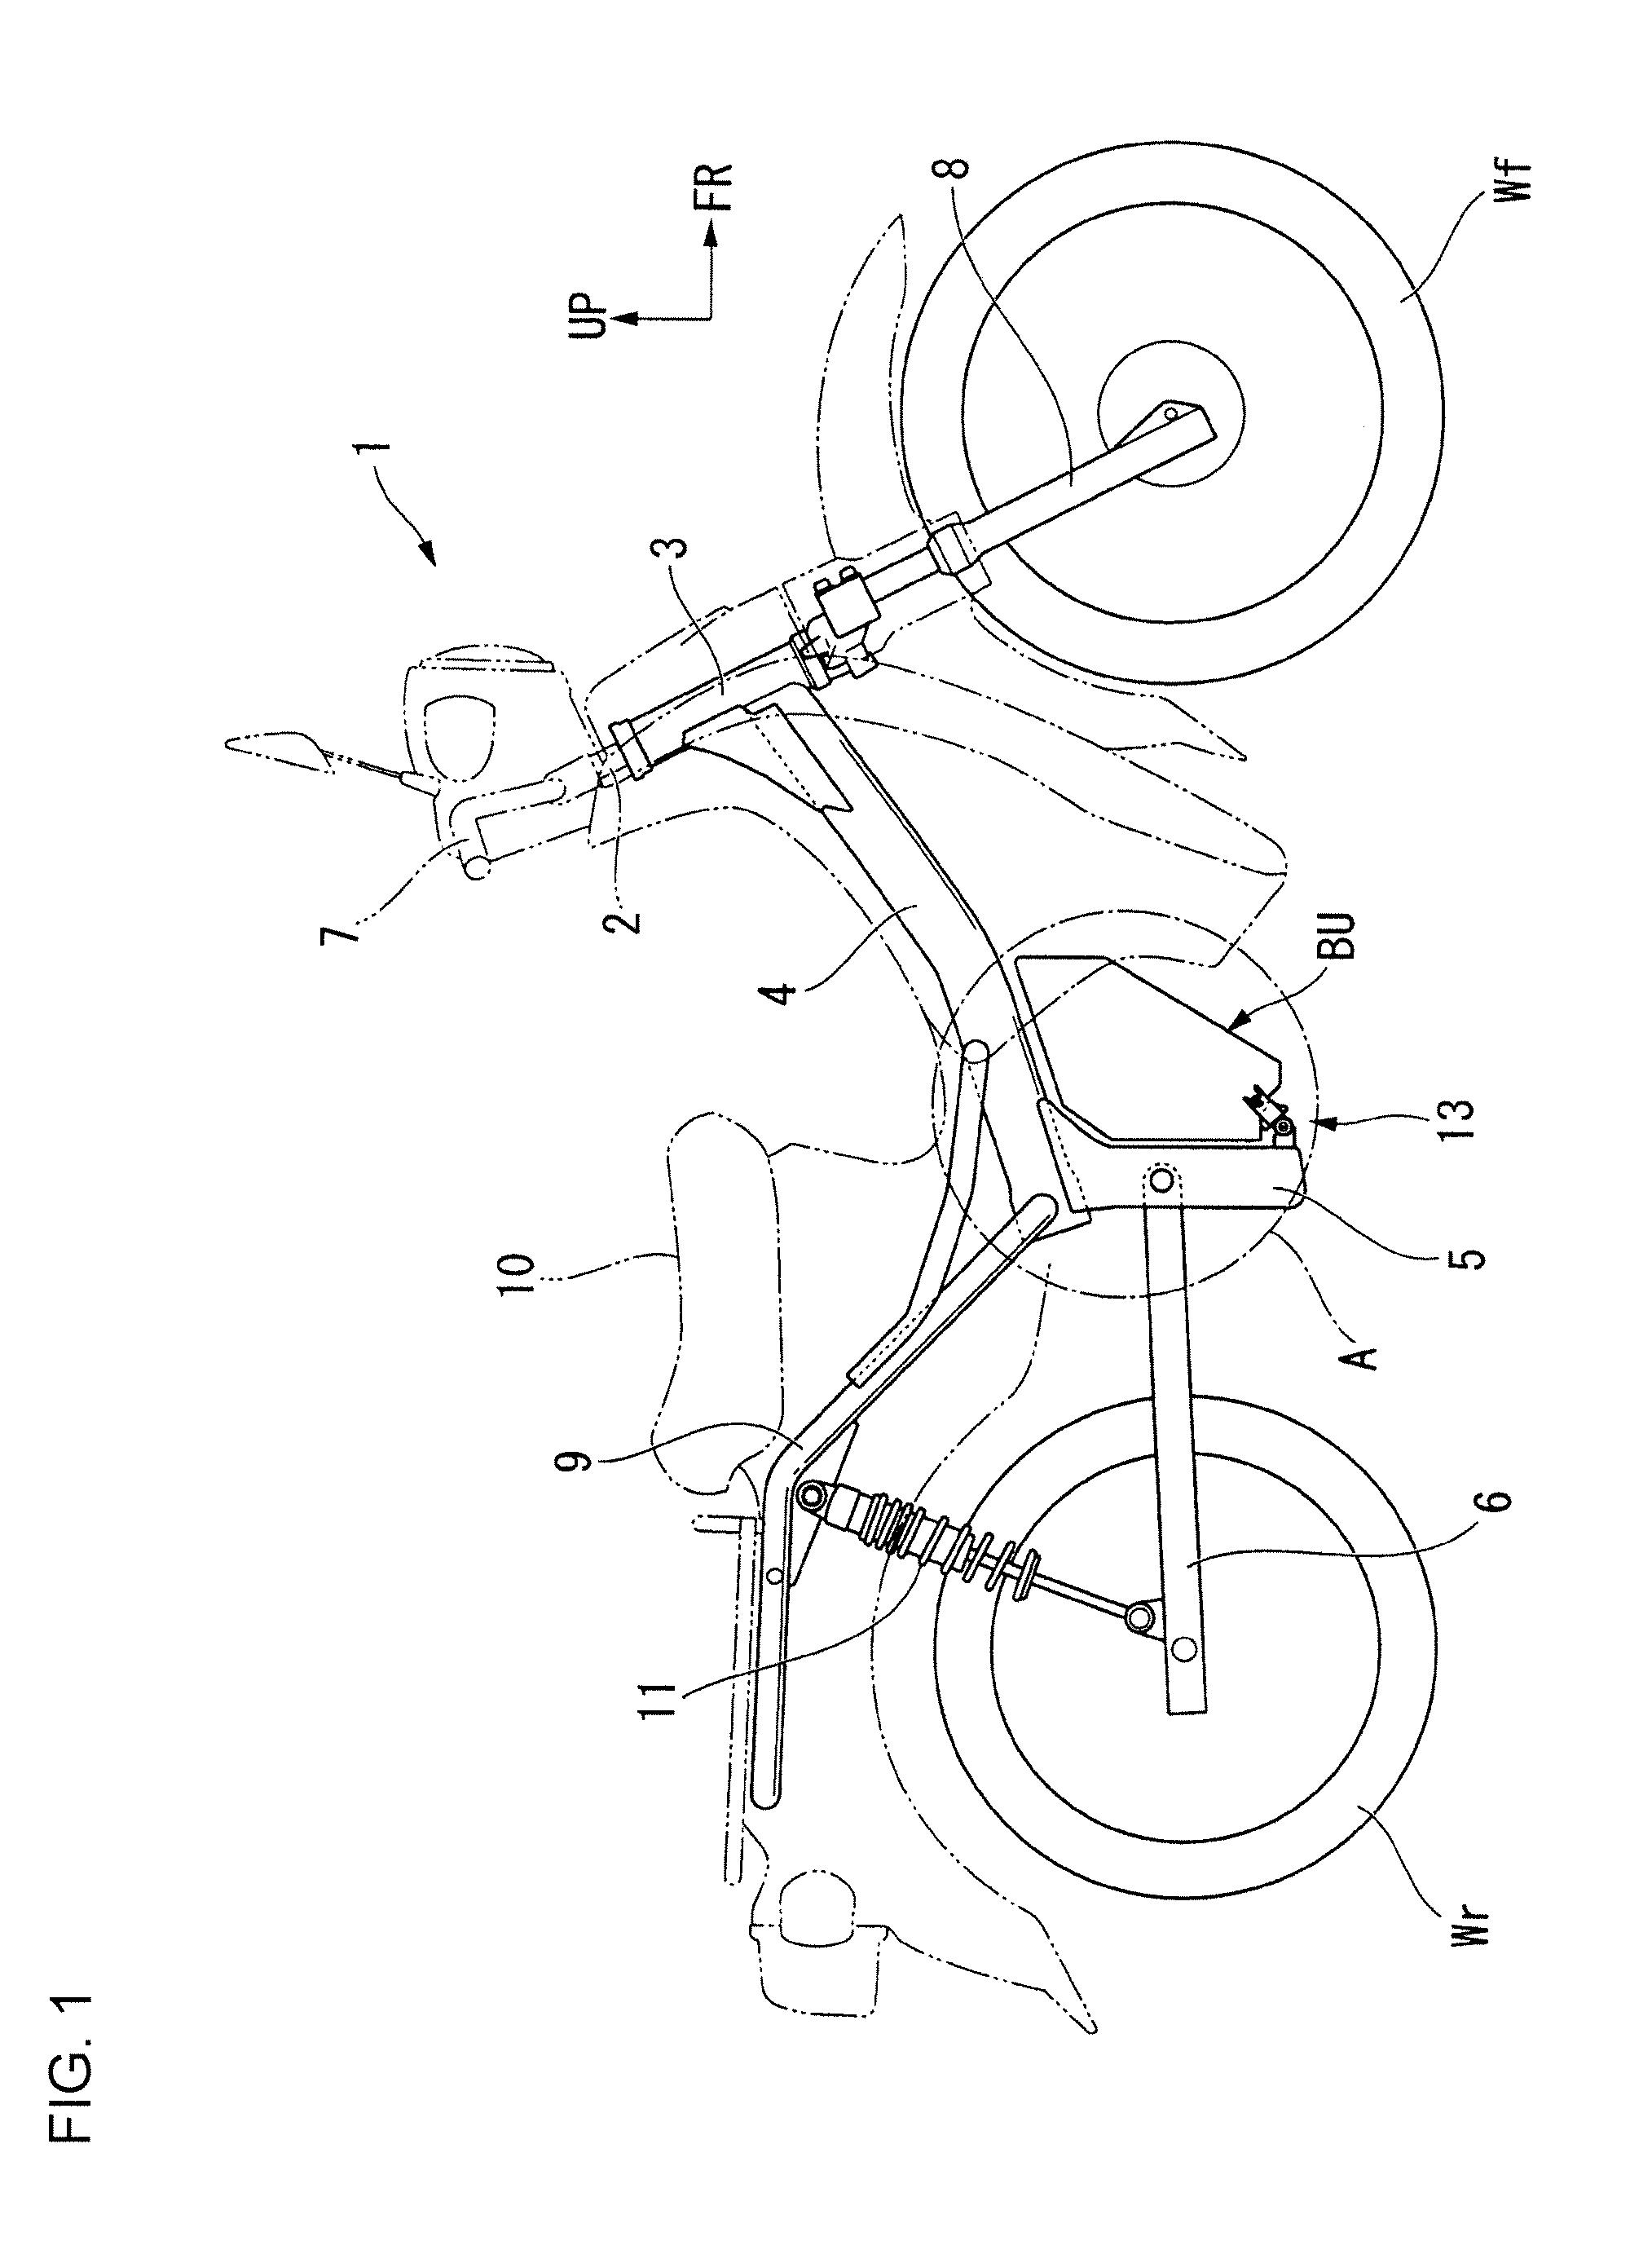 Battery unit connection structure of electric vehicle